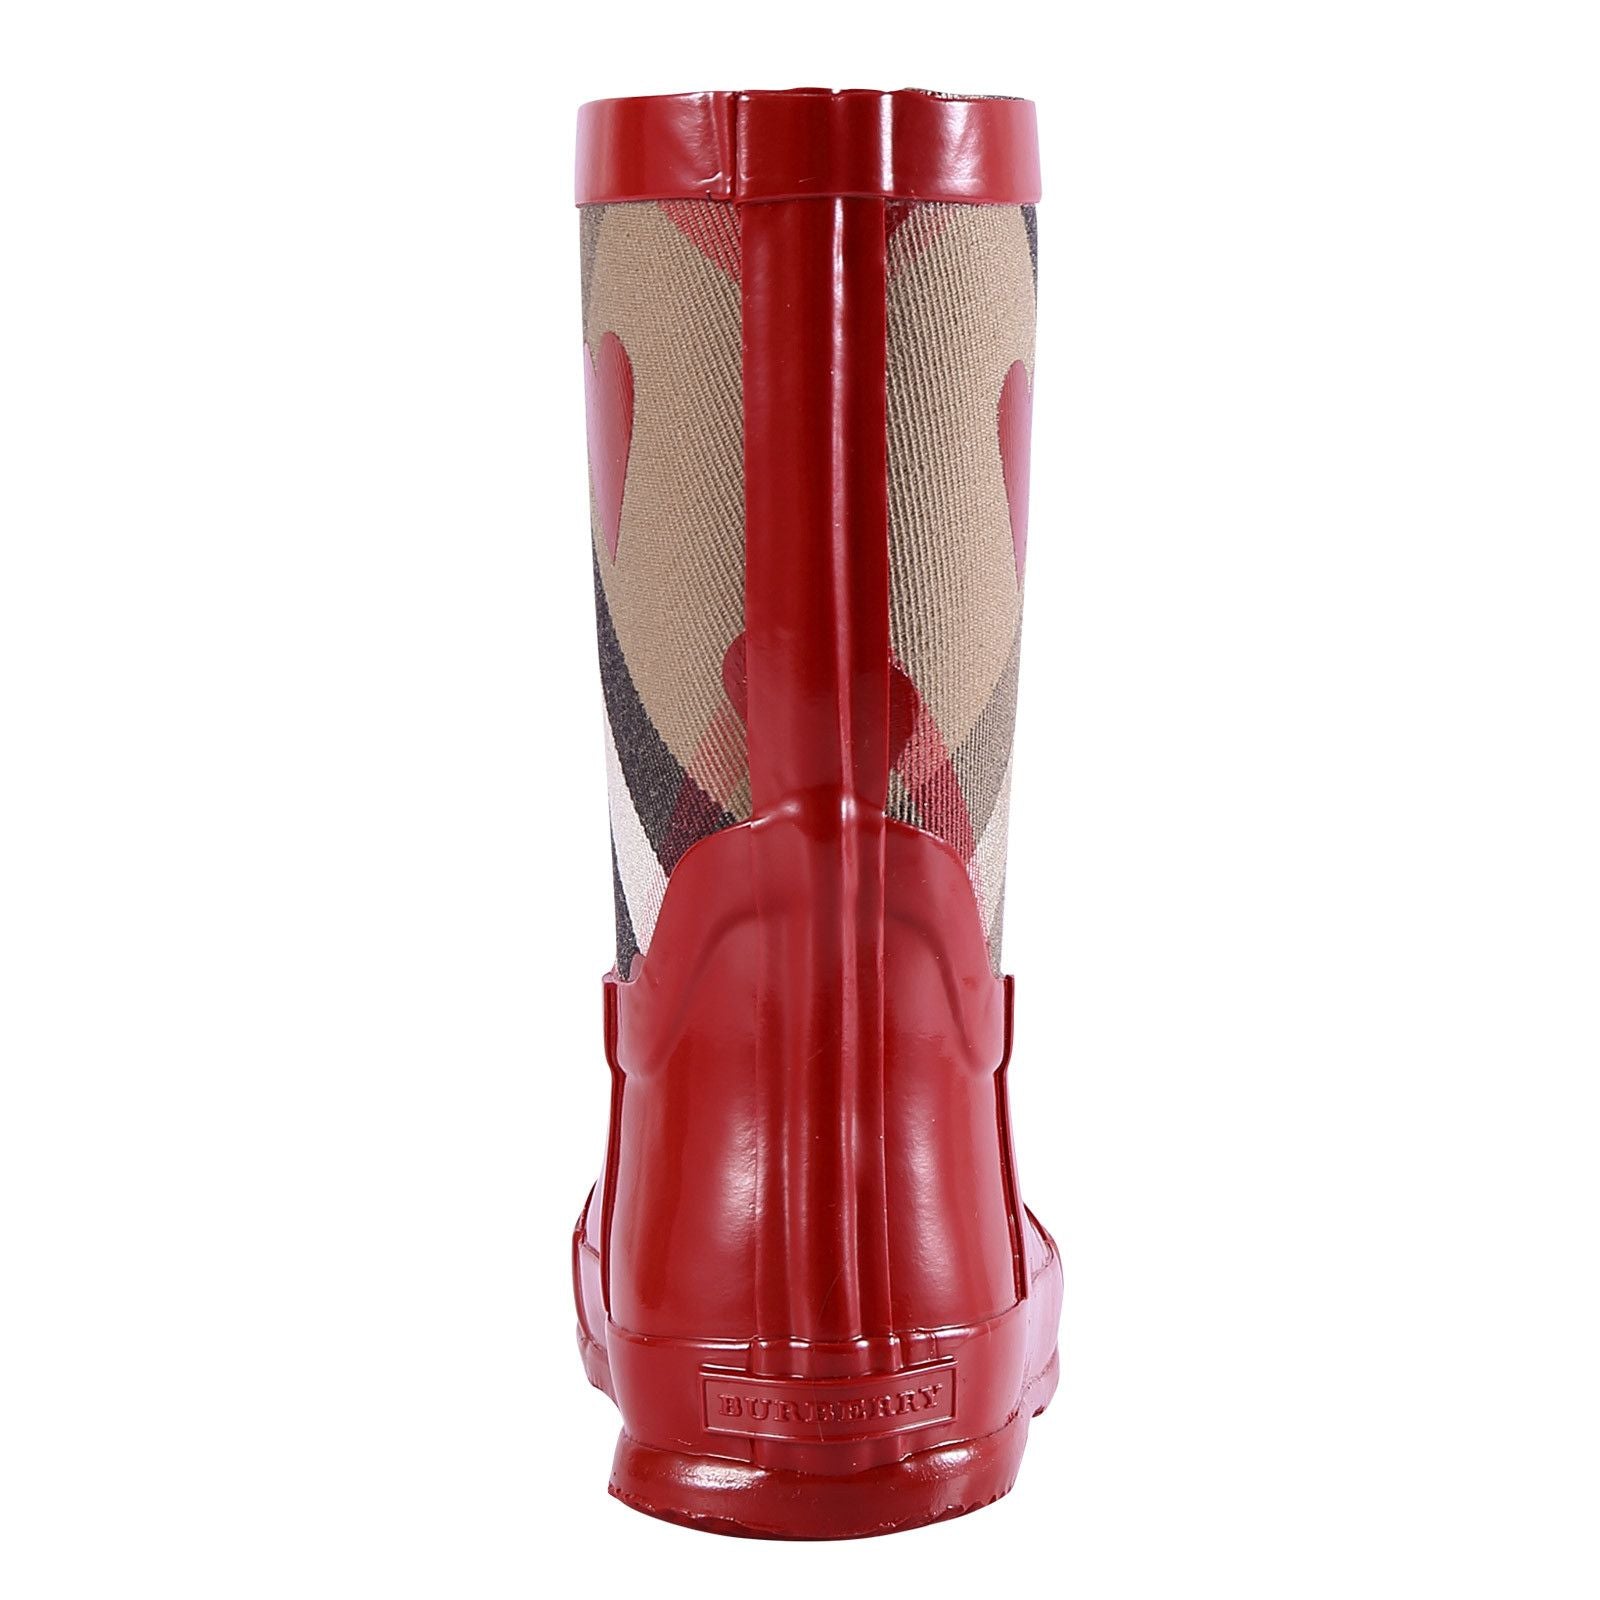 Baby Girls Red Rain Boots With House Check & Hearts - CÉMAROSE | Children's Fashion Store - 3